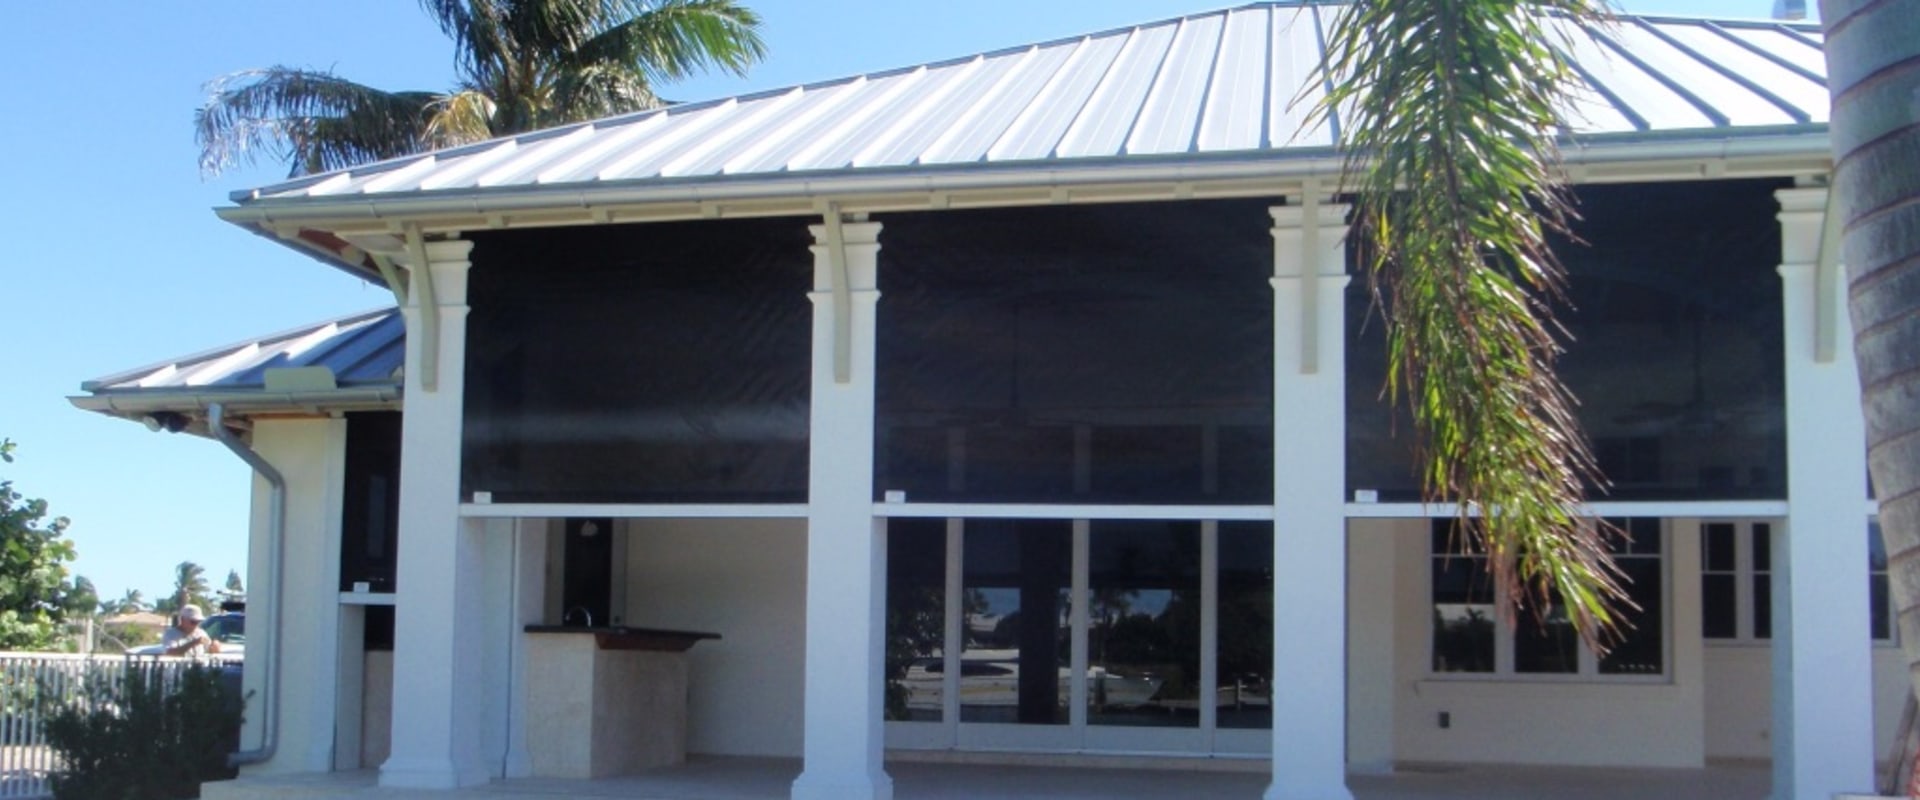 Installing a UV Light in Pompano Beach, FL: What You Need to Know